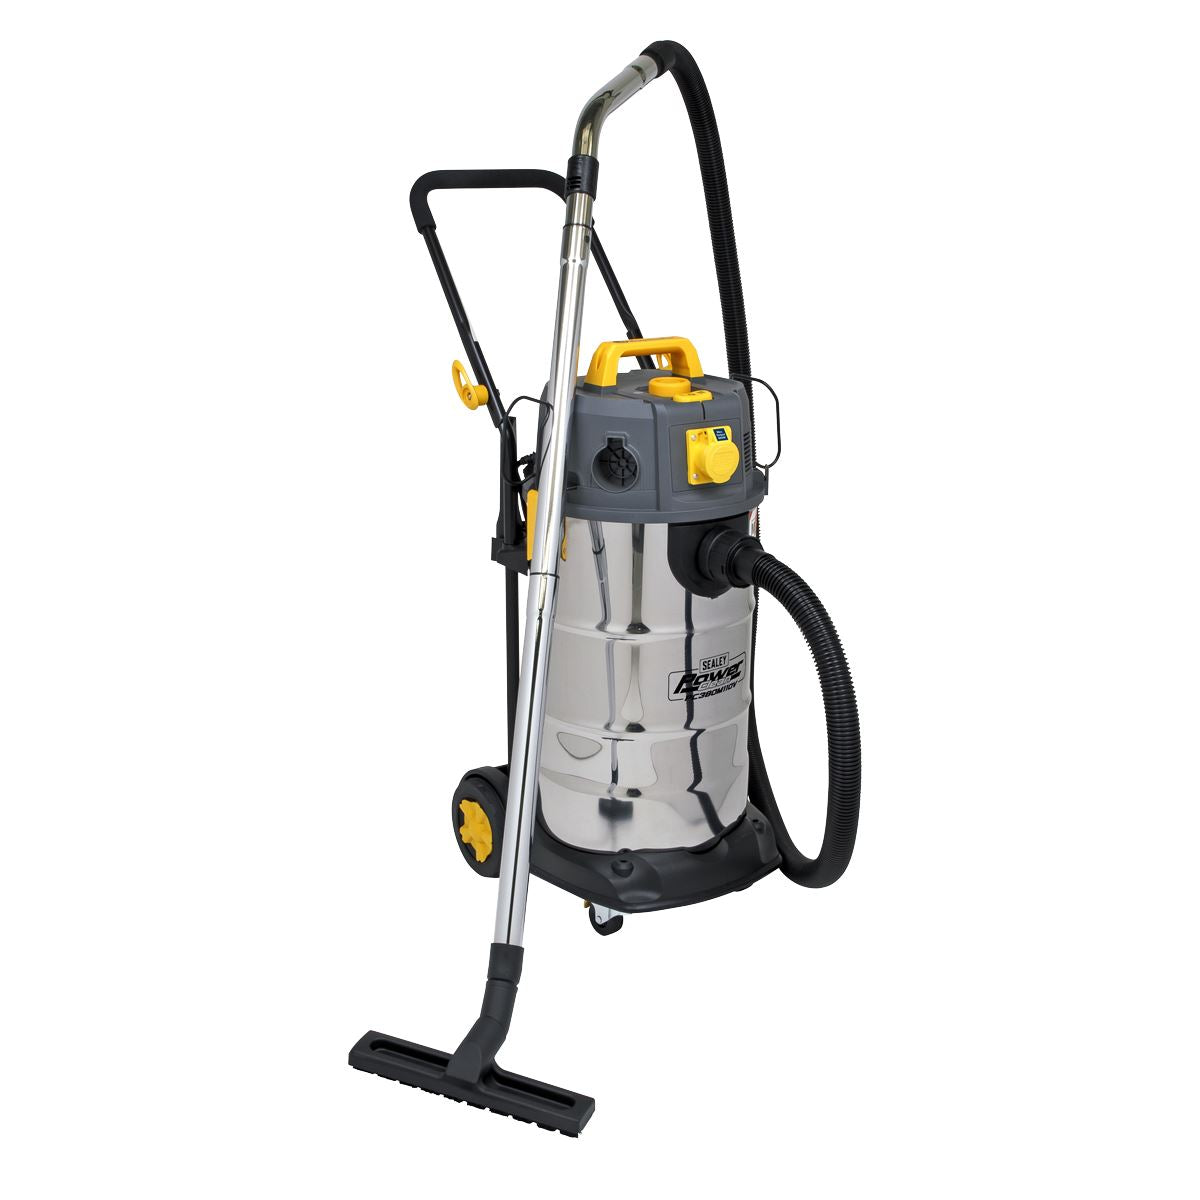 Sealey Vacuum Cleaner Industrial Dust-Free Wet/Dry 38L 1100W/110V Stainless Steel Drum M Class Filtration